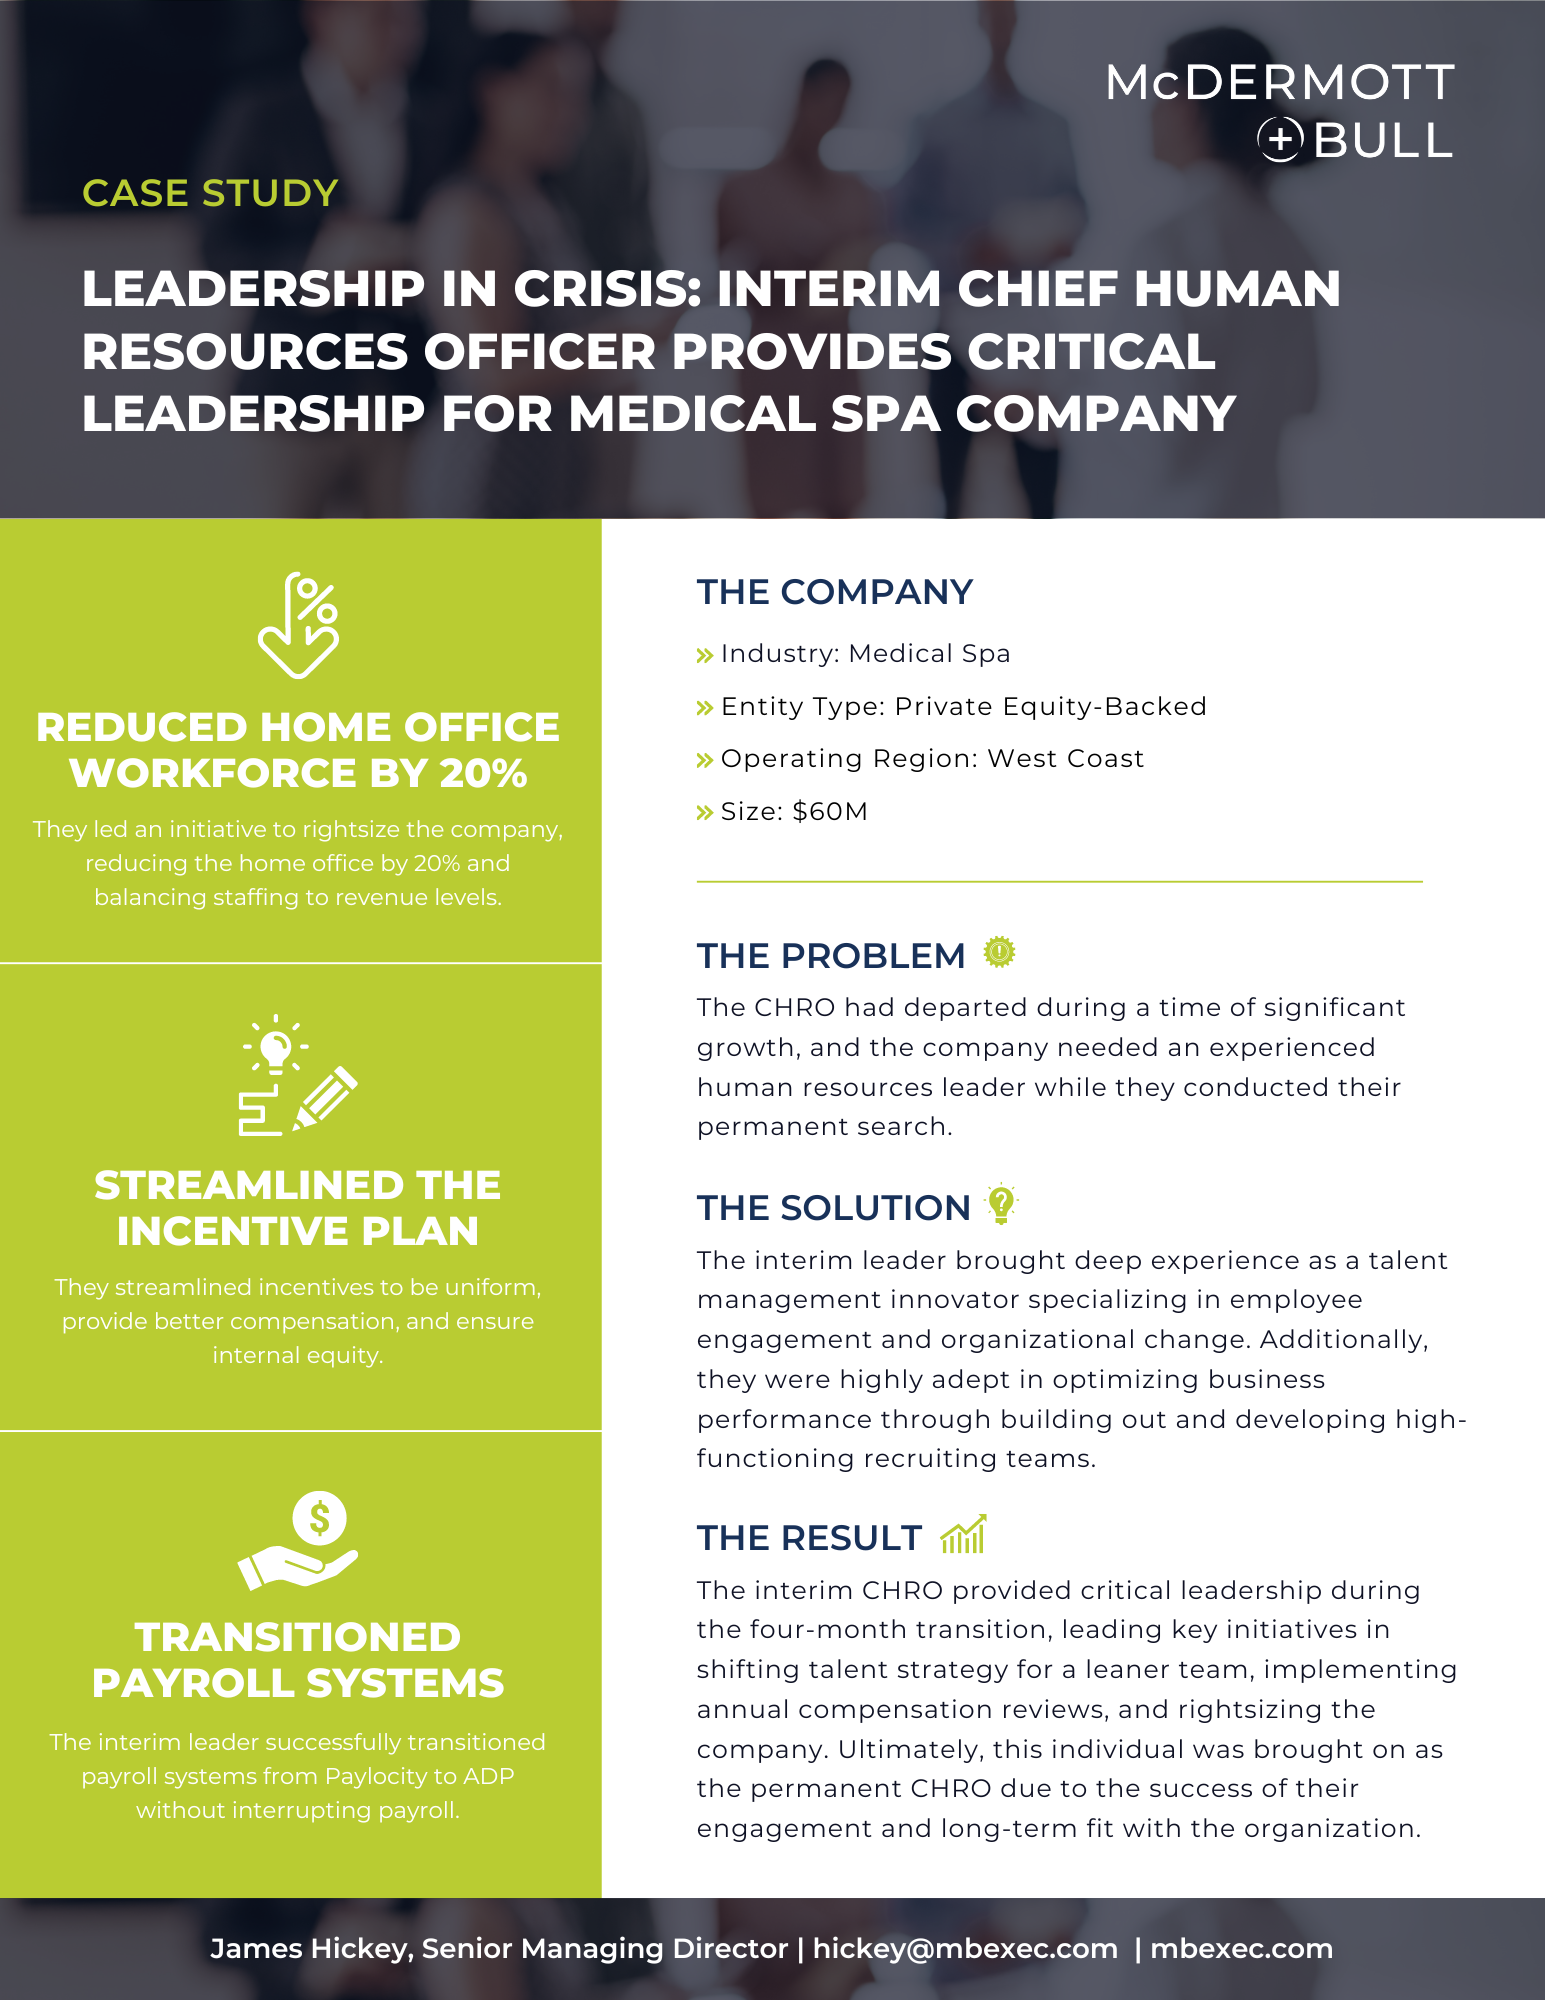 Leadership in Crisis: Interim Chief Human Resources Officer Provides Critical Leadership for Medical Spa Company